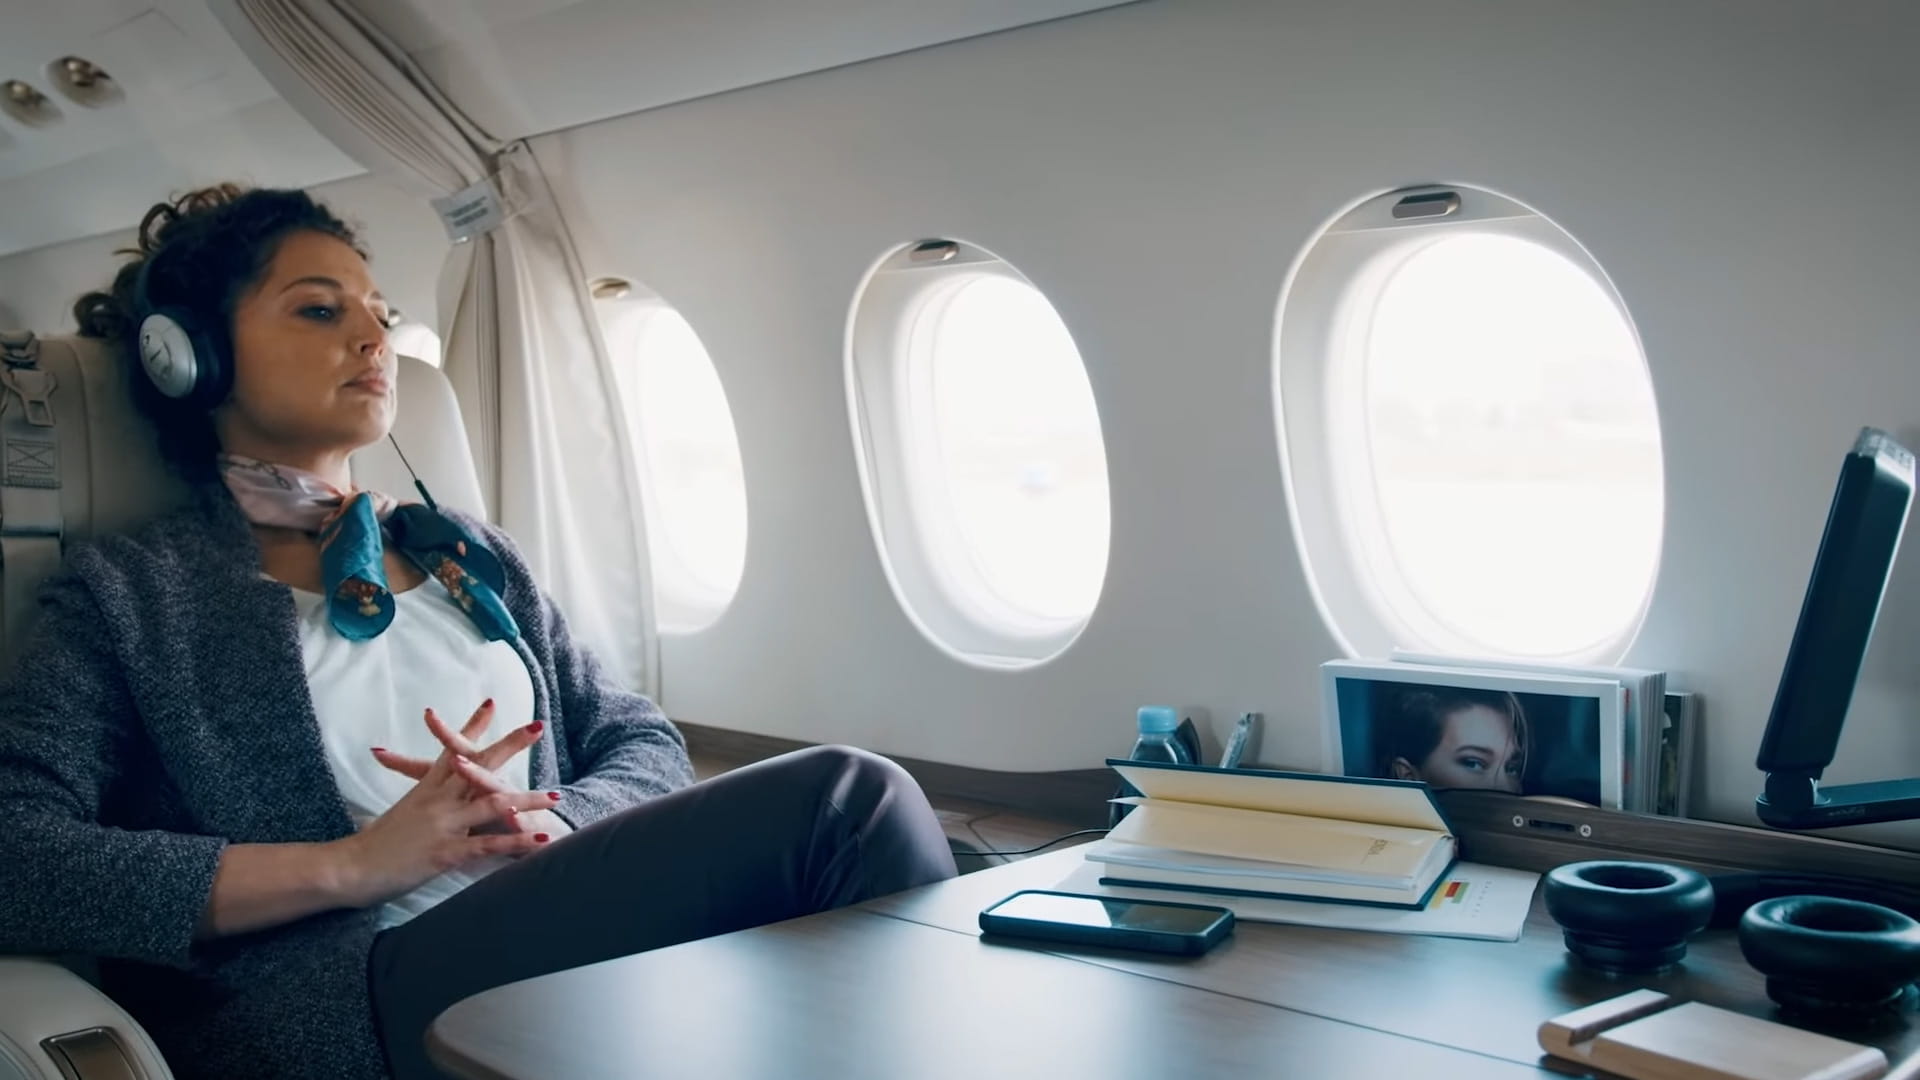 A woman relaxes in a business jet cabin while wearing headphones